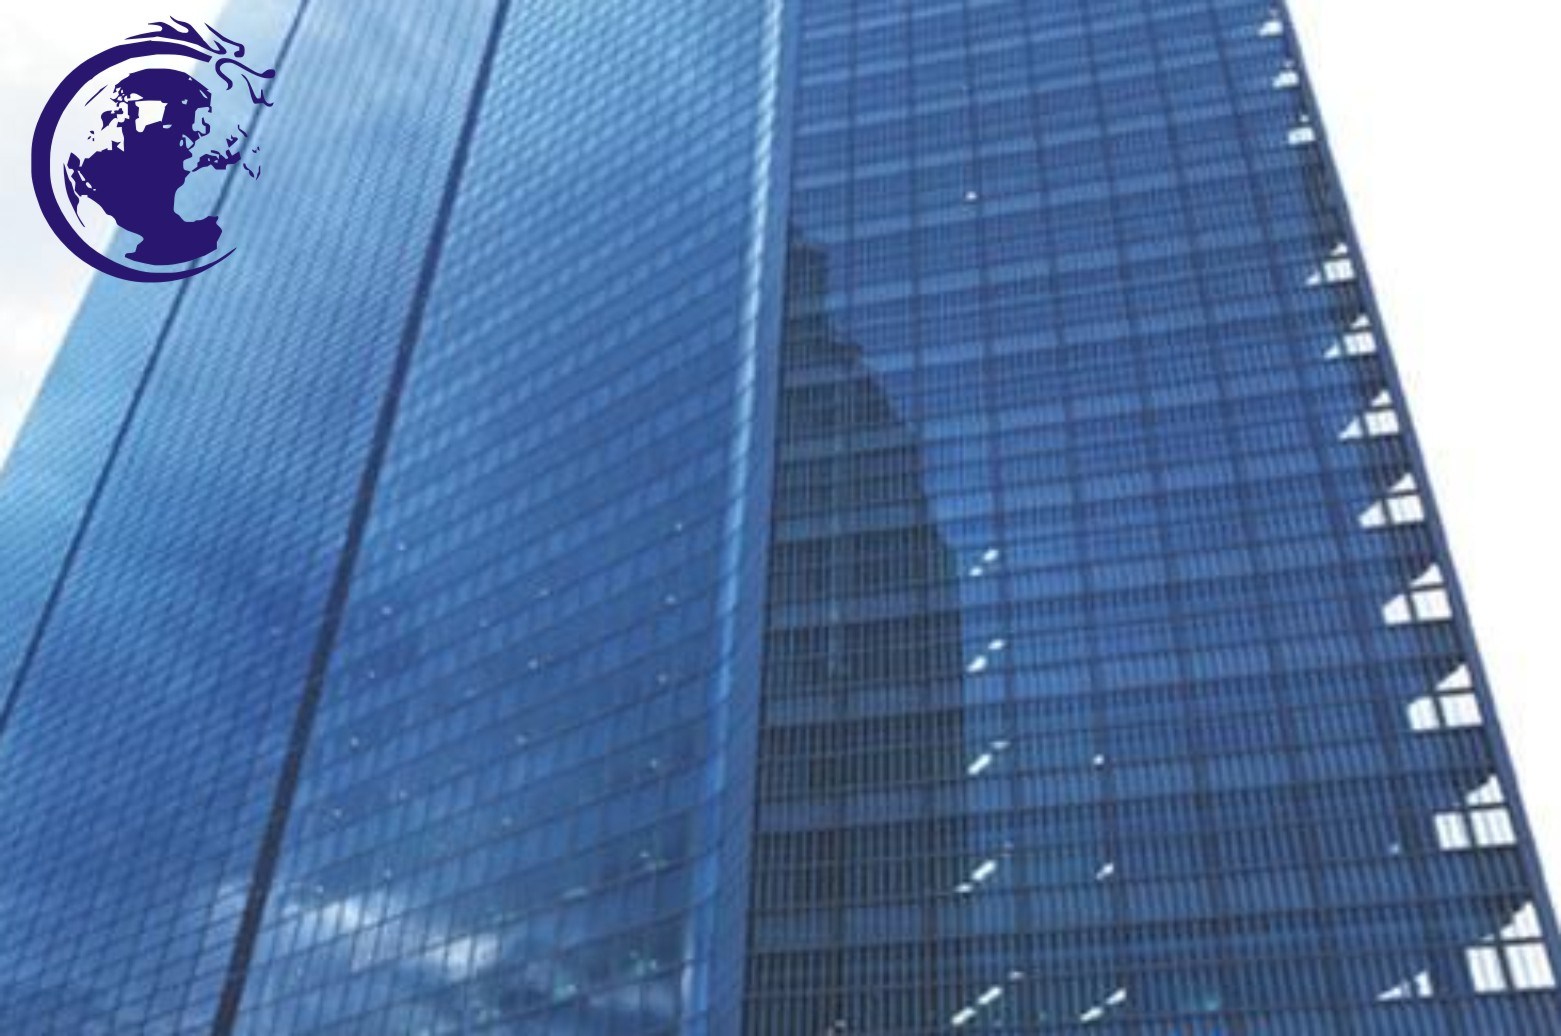 ISO9001&CE, Building Reflective Glass